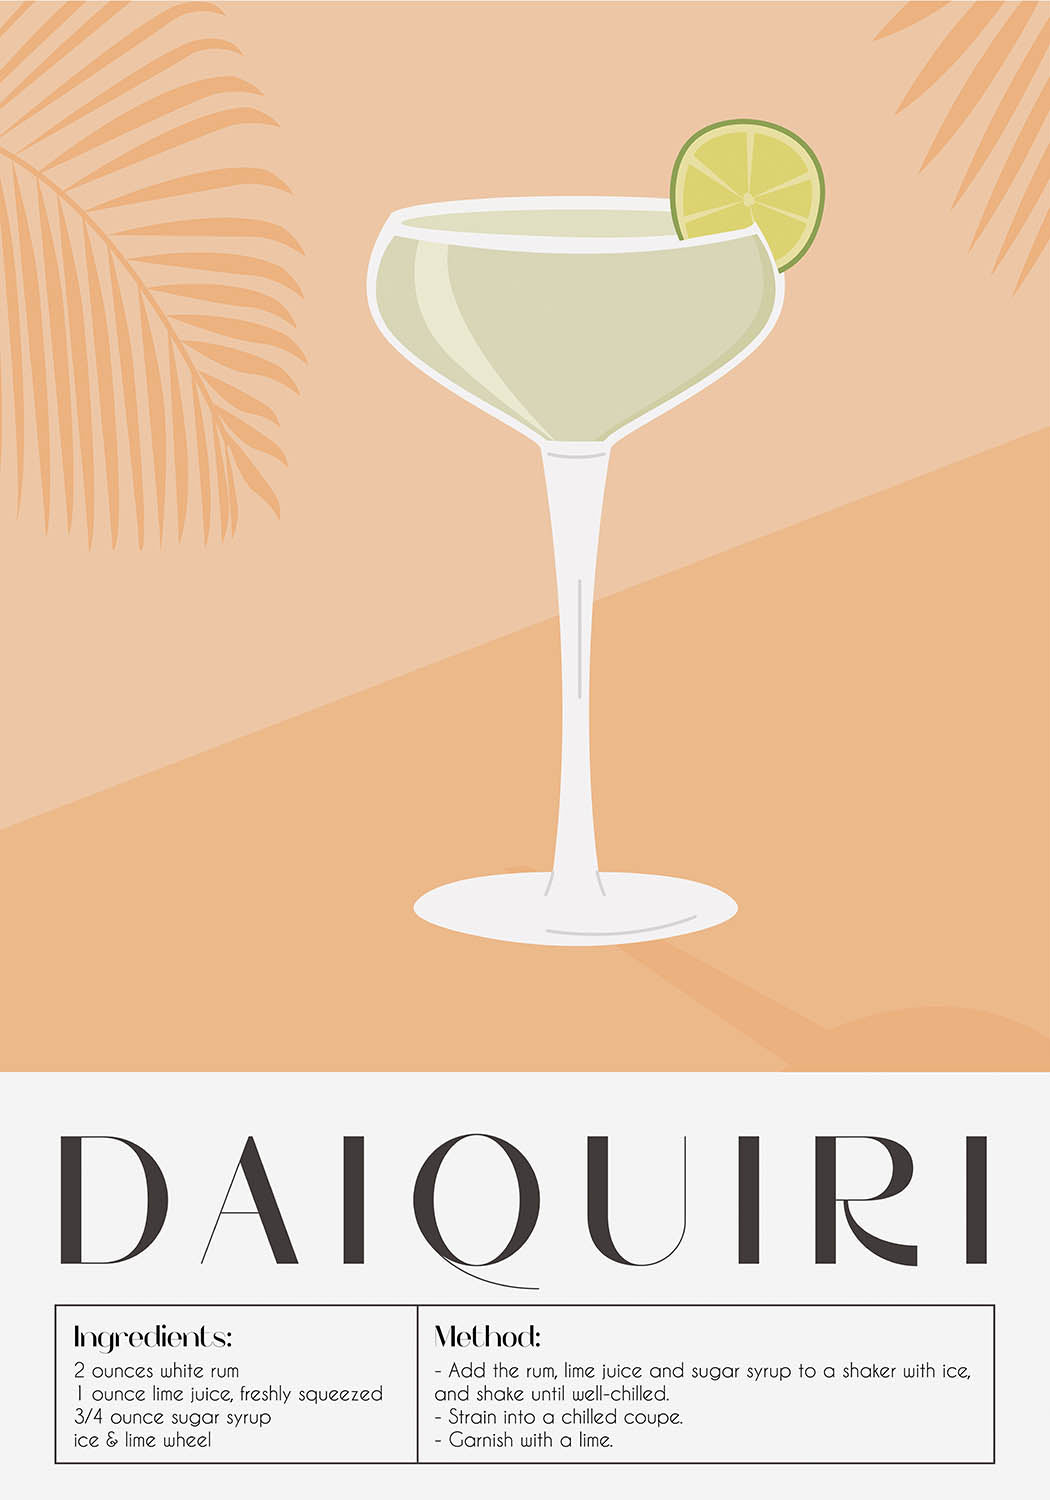 Stylish poster featuring a classic Daiquiri cocktail illustration with a lime wheel garnish, set against a peach backdrop with a subtle palm leaf pattern